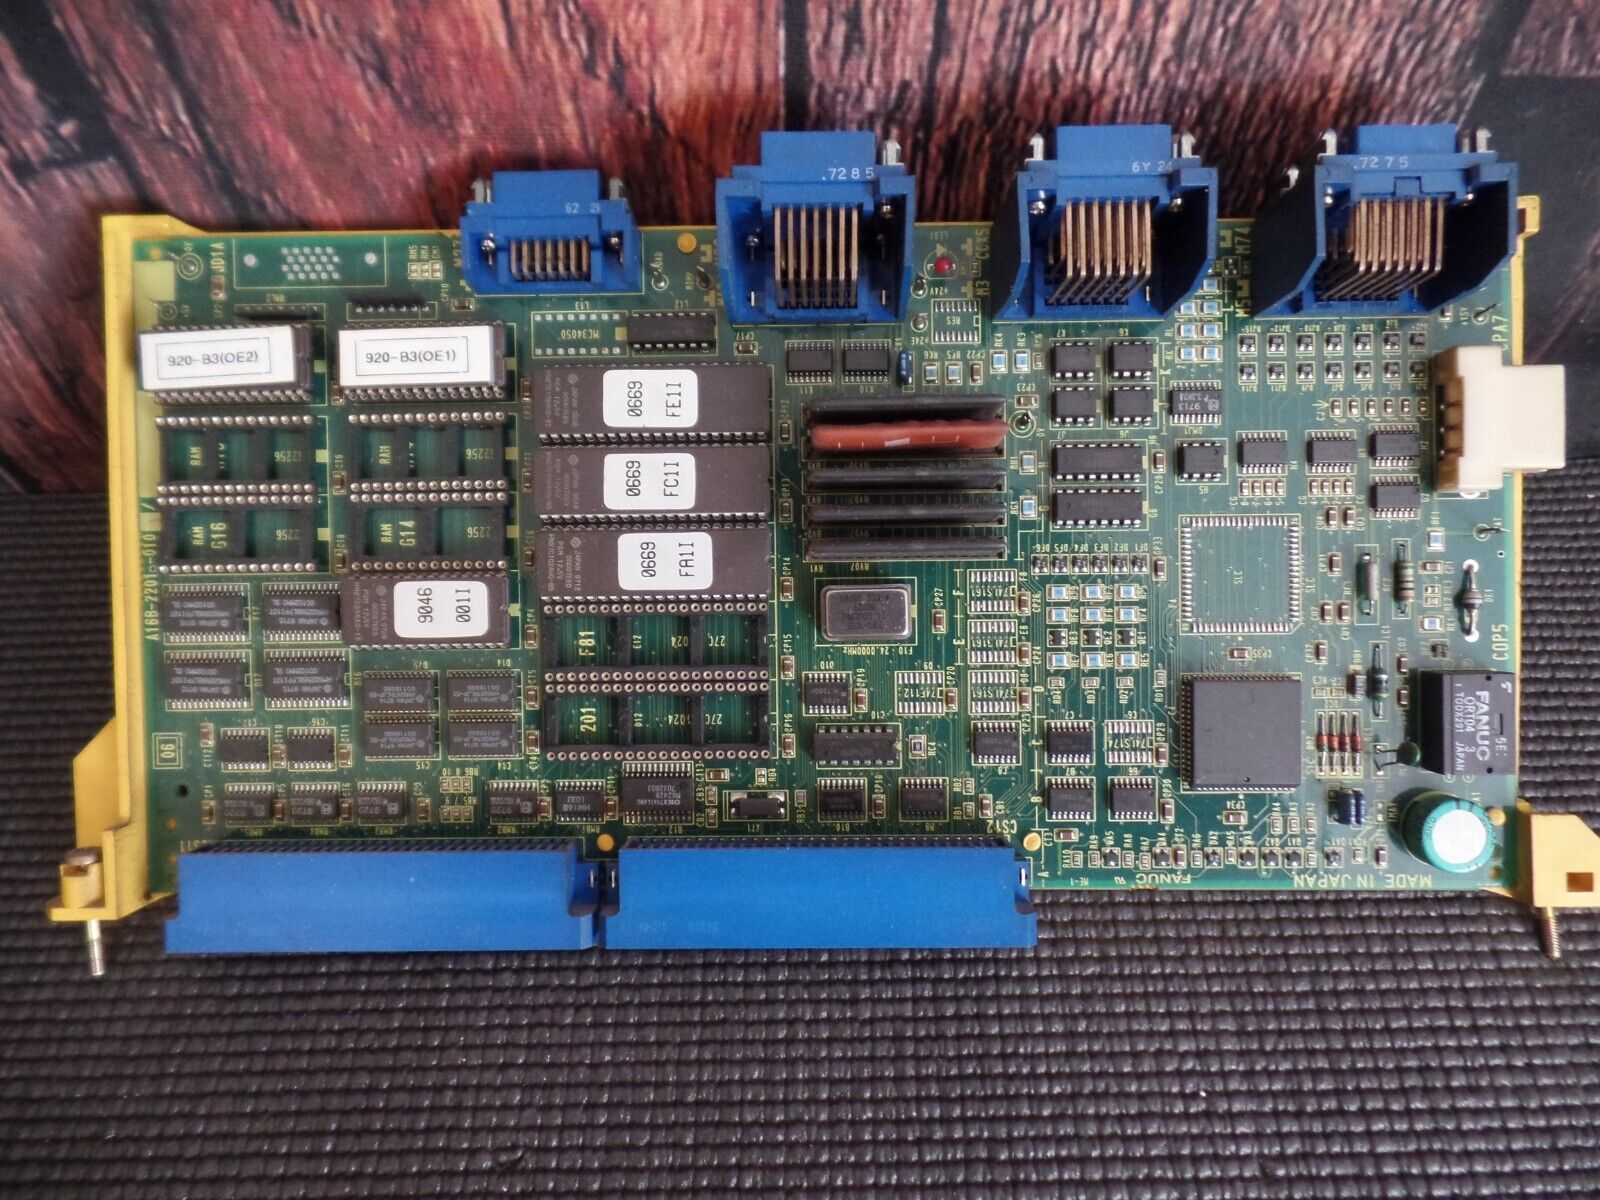 FANUC A16B-2201-0101 MEMORY BOARD IS REPAIRED BY IVS WITH A 45 DAY WARRANTY